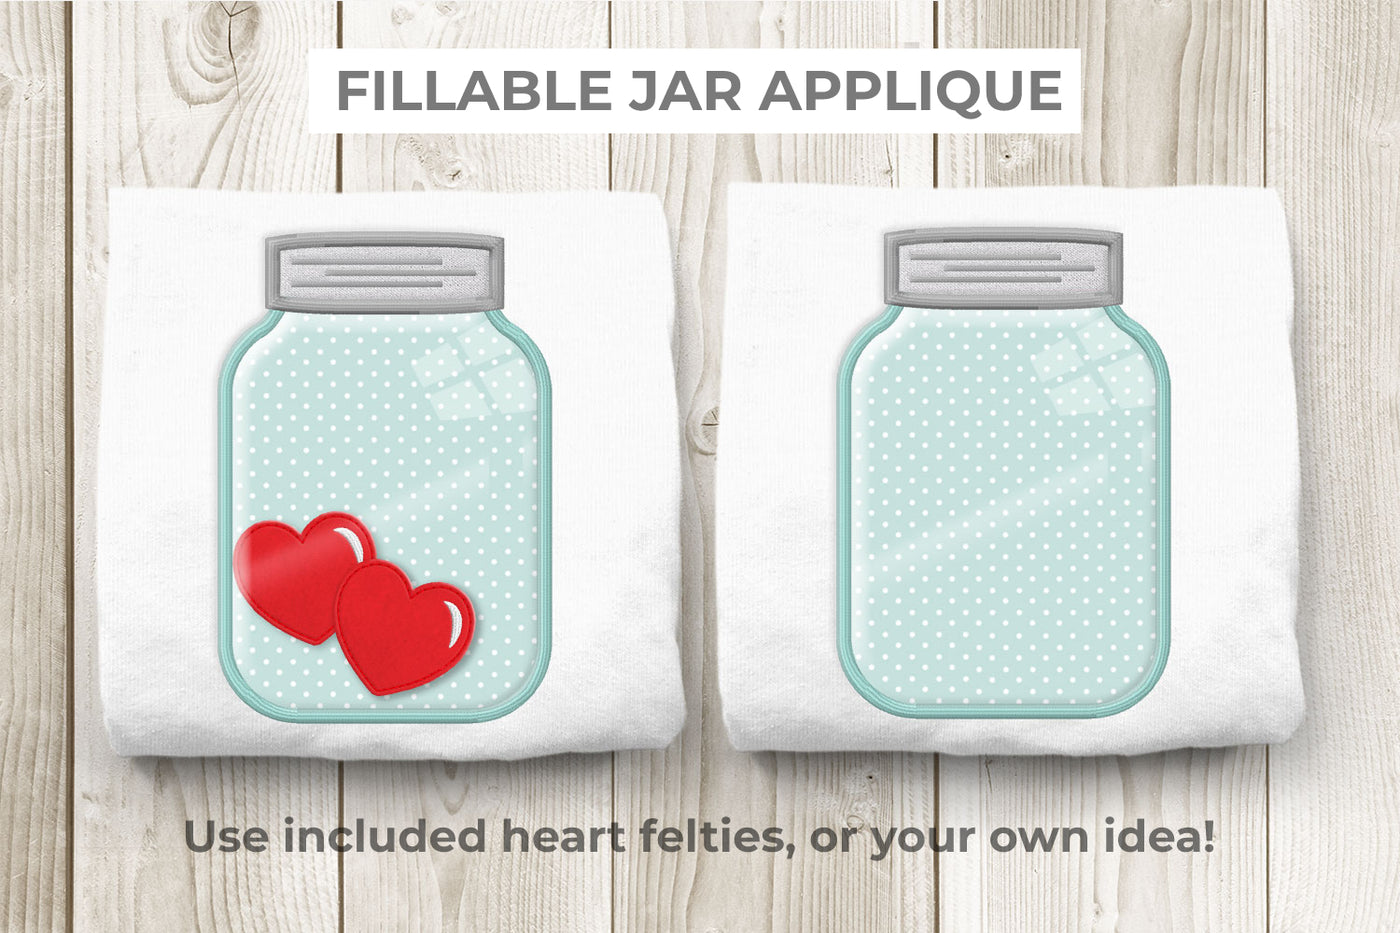 Jar applique with heart felties inside. Text on image reads "Fillable jar applique. Use included heart felties, or your own idea!"